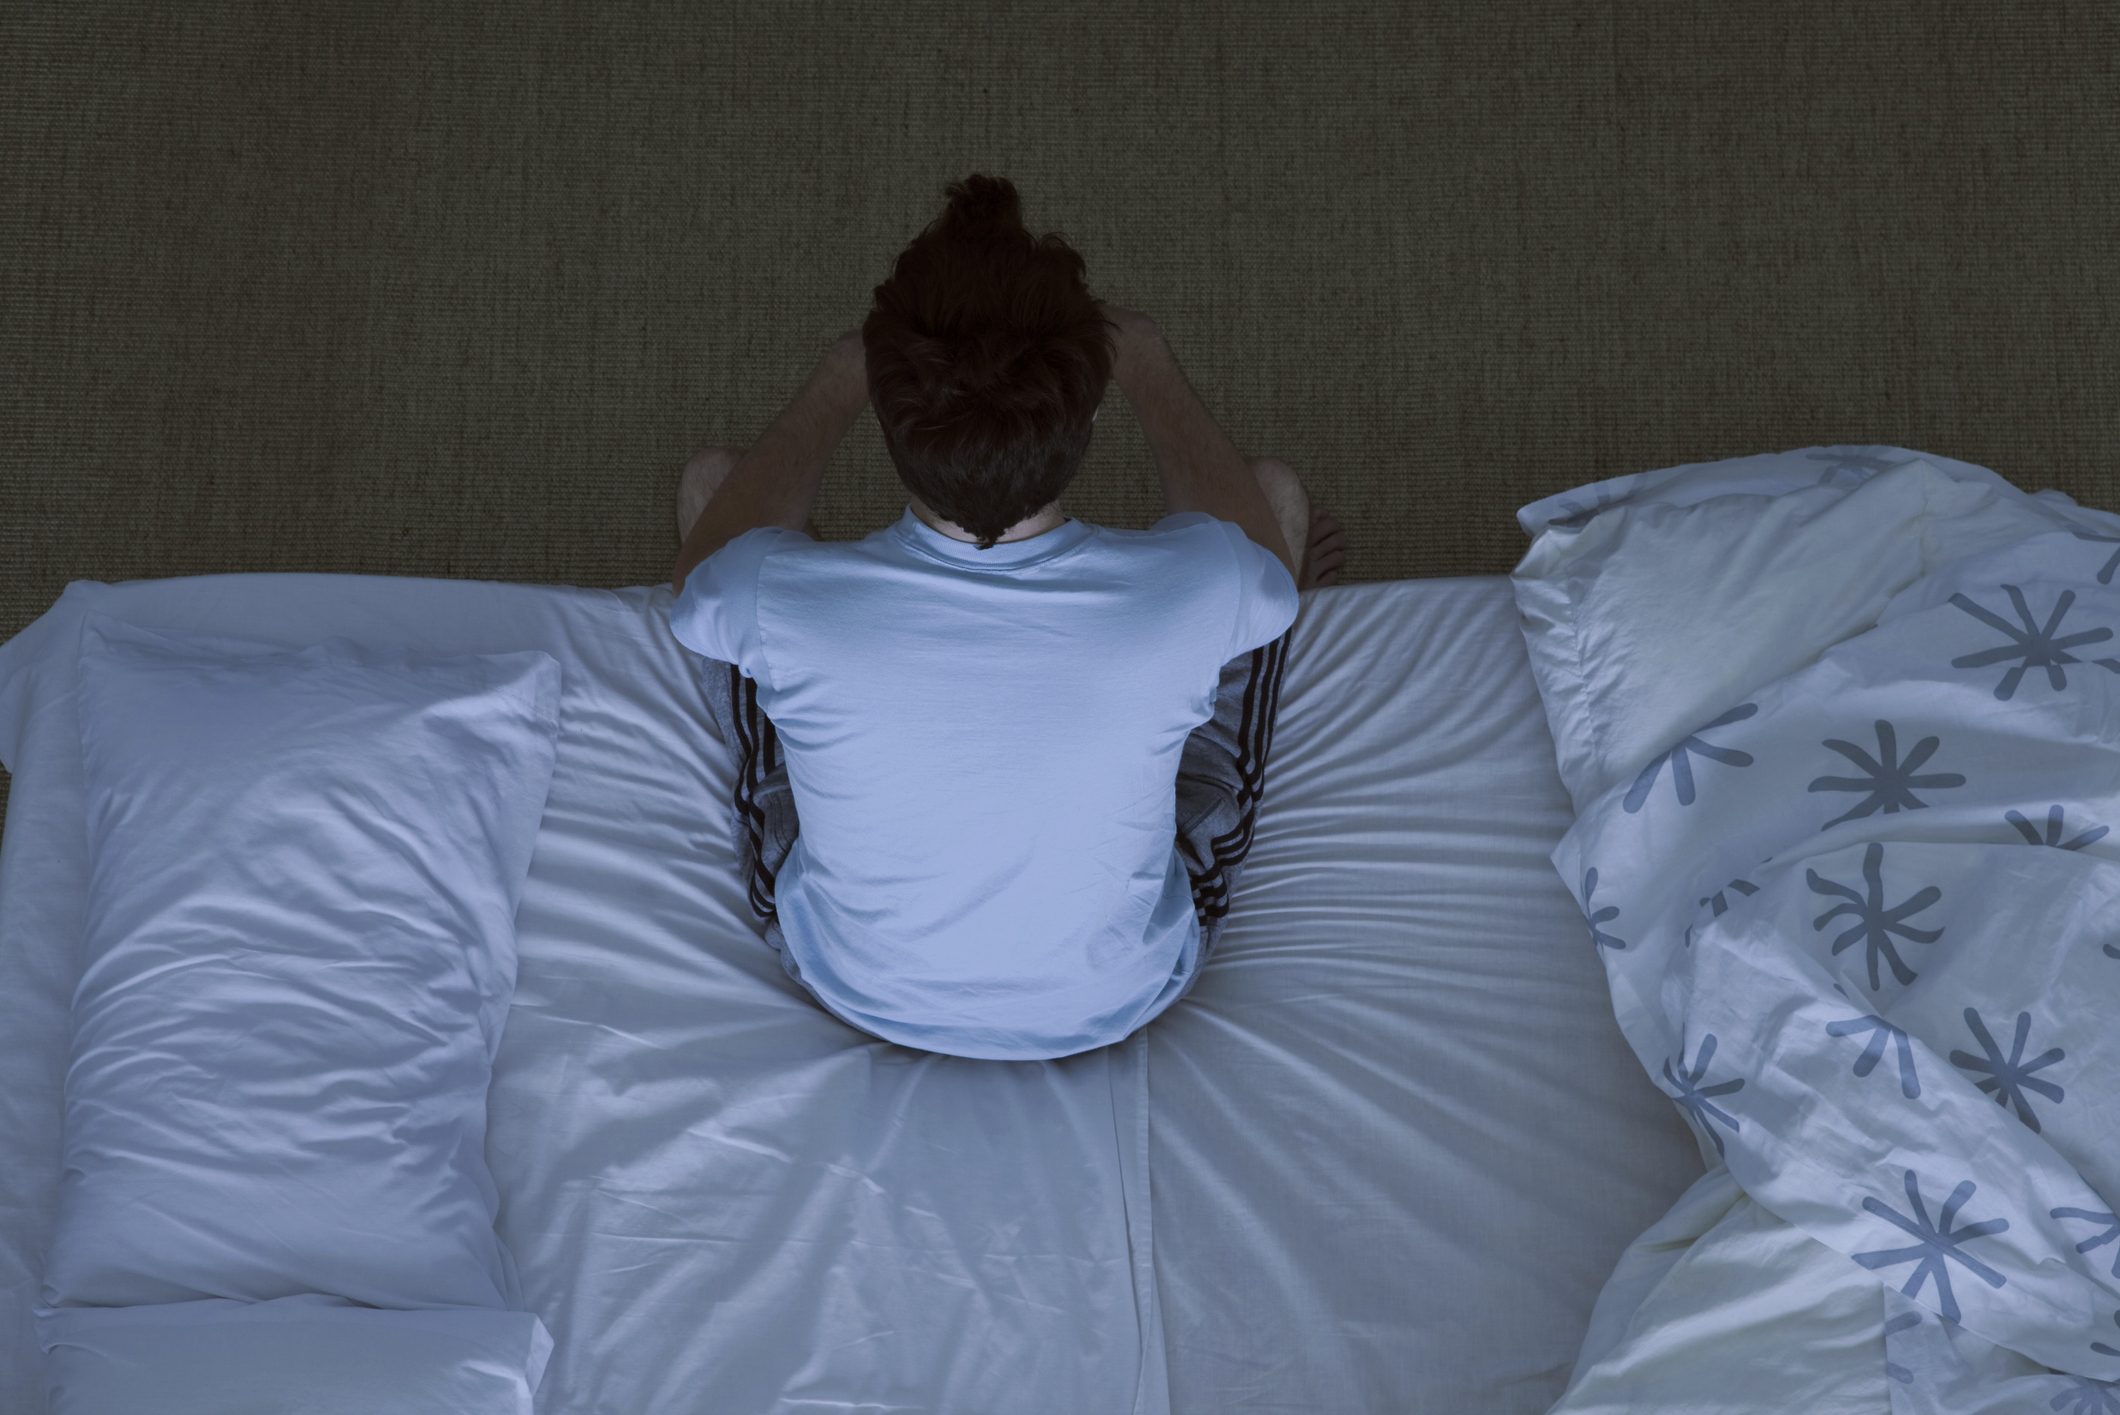 If You Have Panic Attacks at Night, Here's What to Do